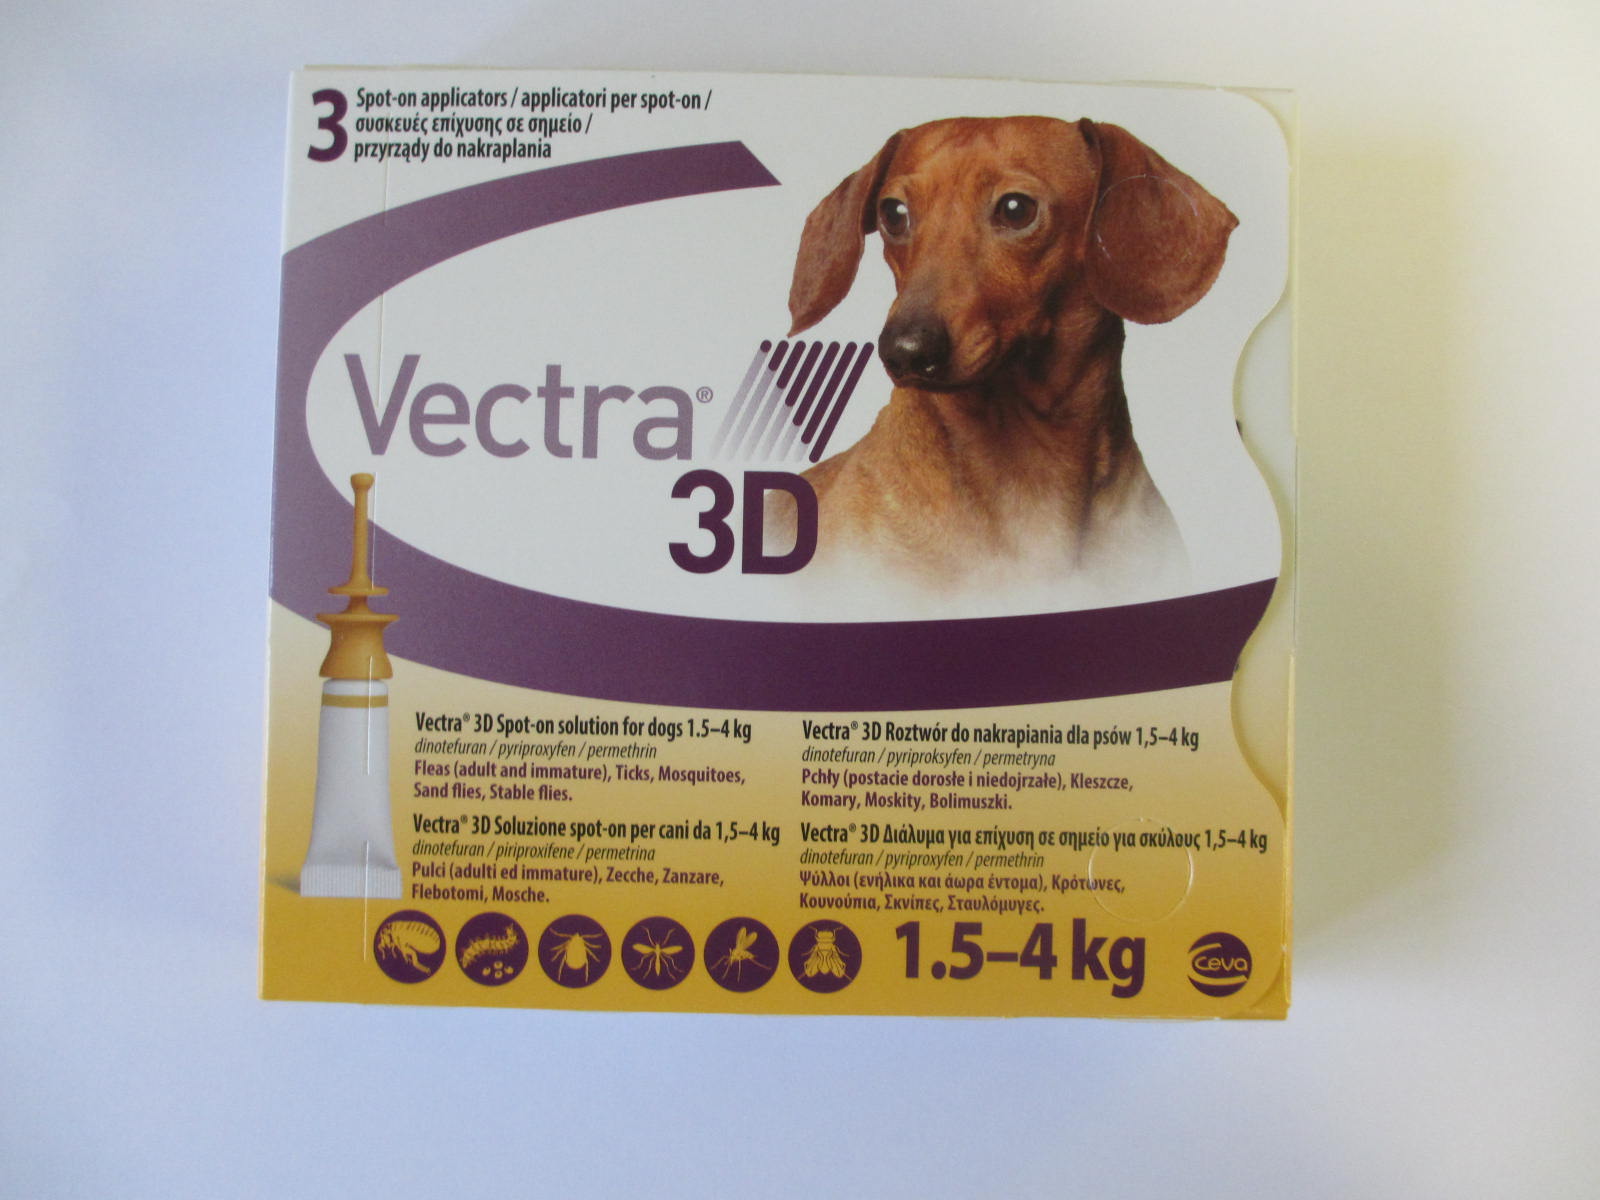 vectra 3d side effects